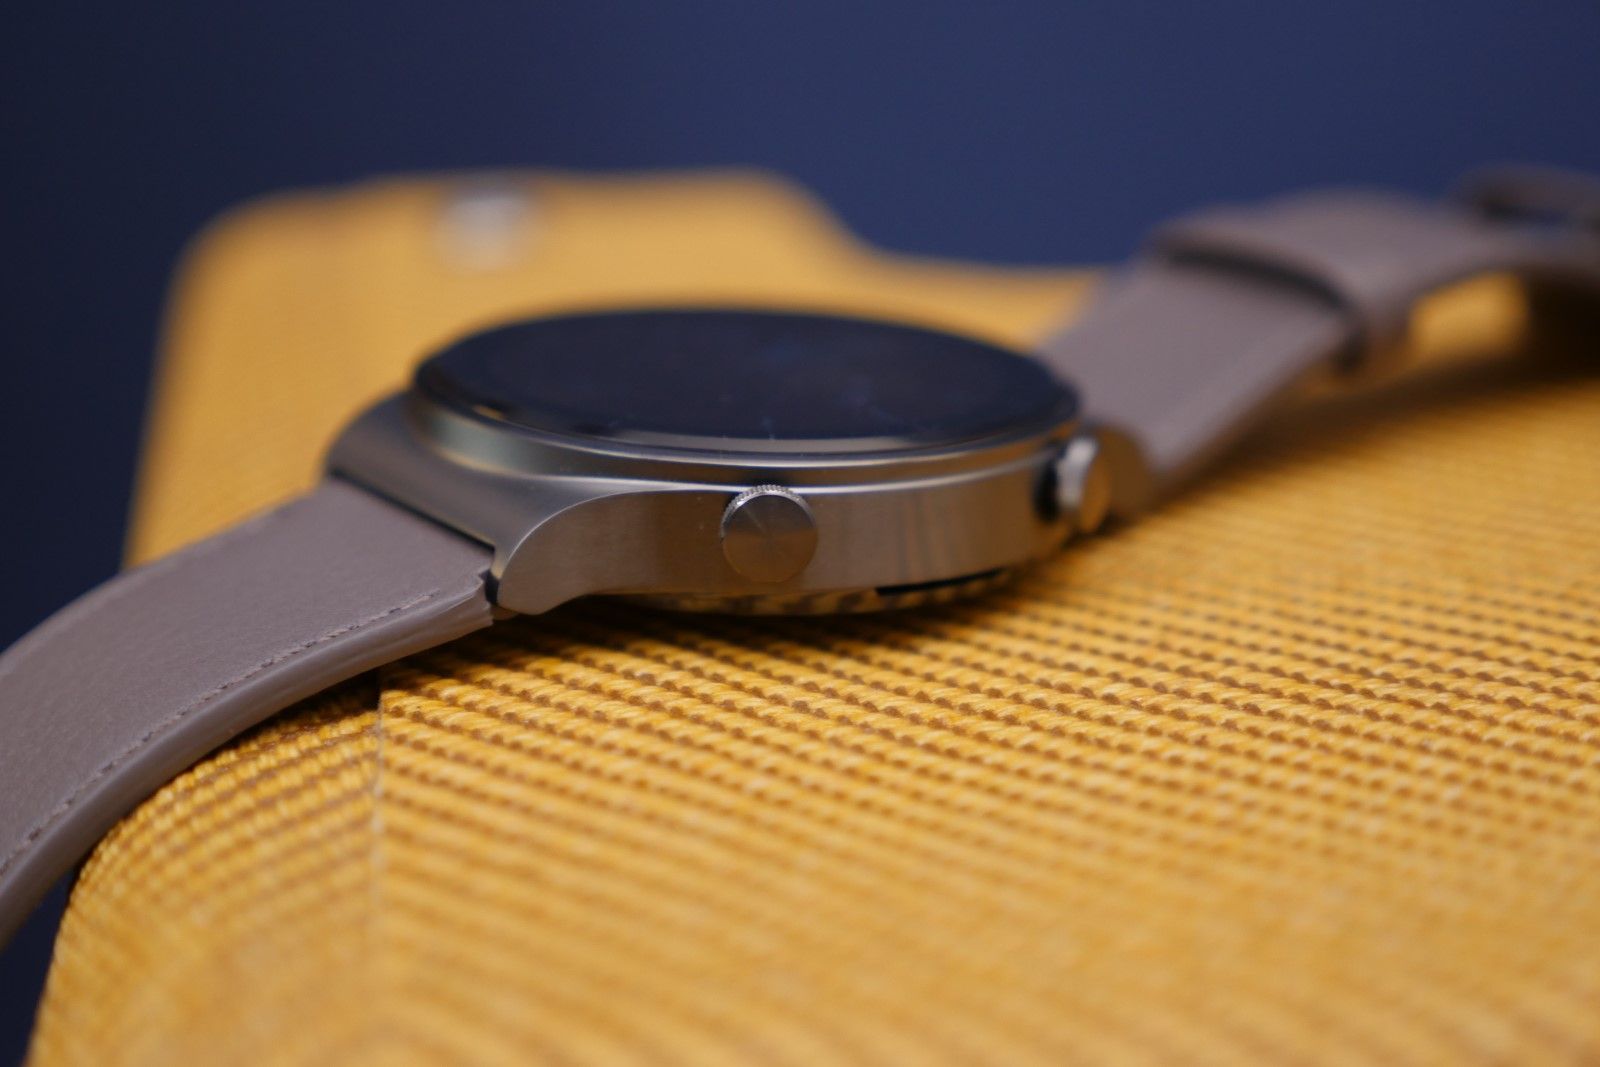 Huawei Watch GT 2 Pro brings premium sapphire and titanium build at an affordable price photo 4